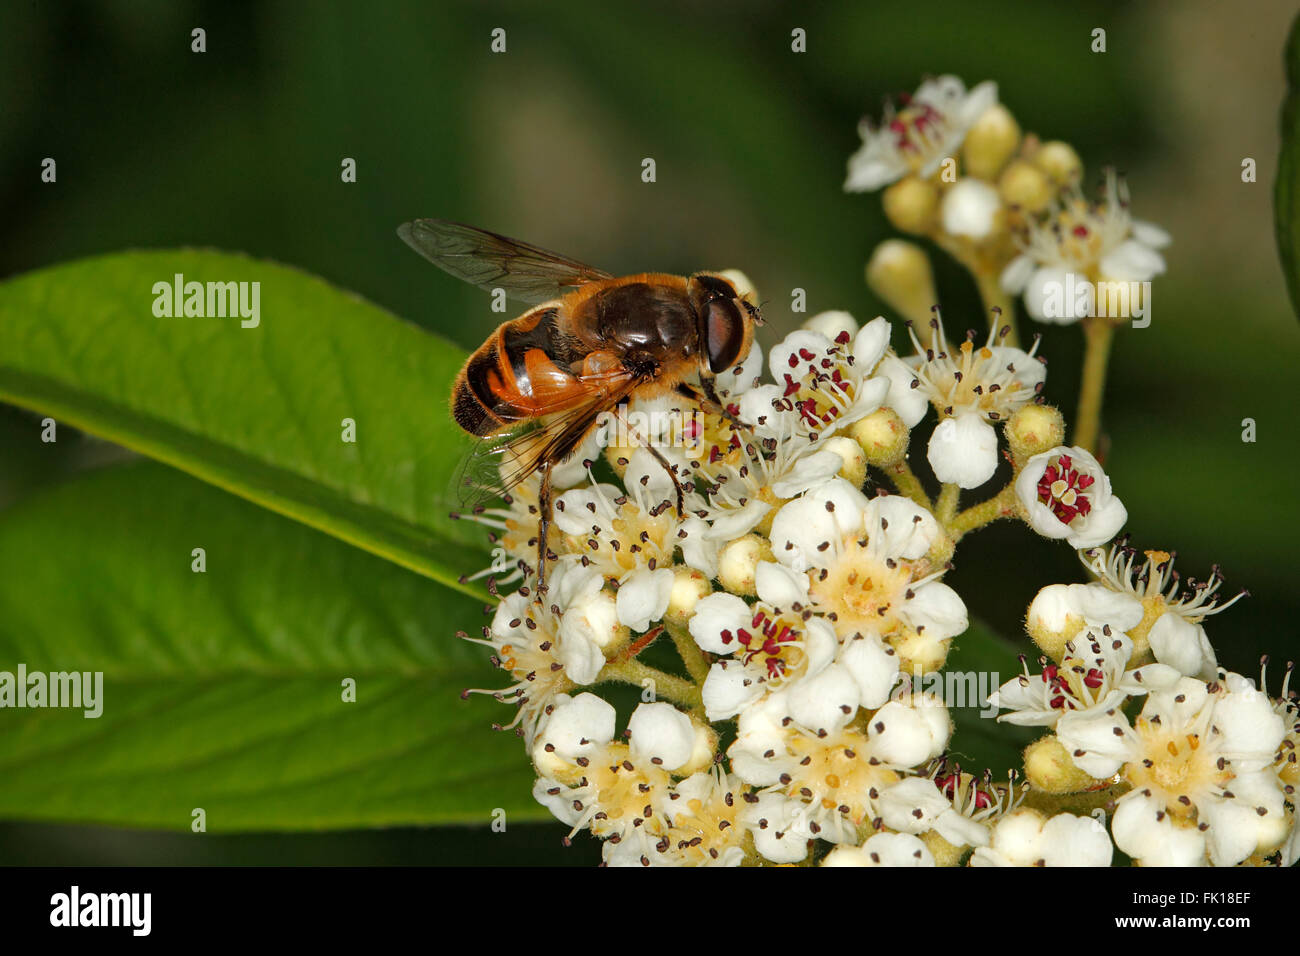 Hoverfly (Eristalis species) feeding on Cotoneaster flowers in garden Cheshire UK July 0173 Stock Photo